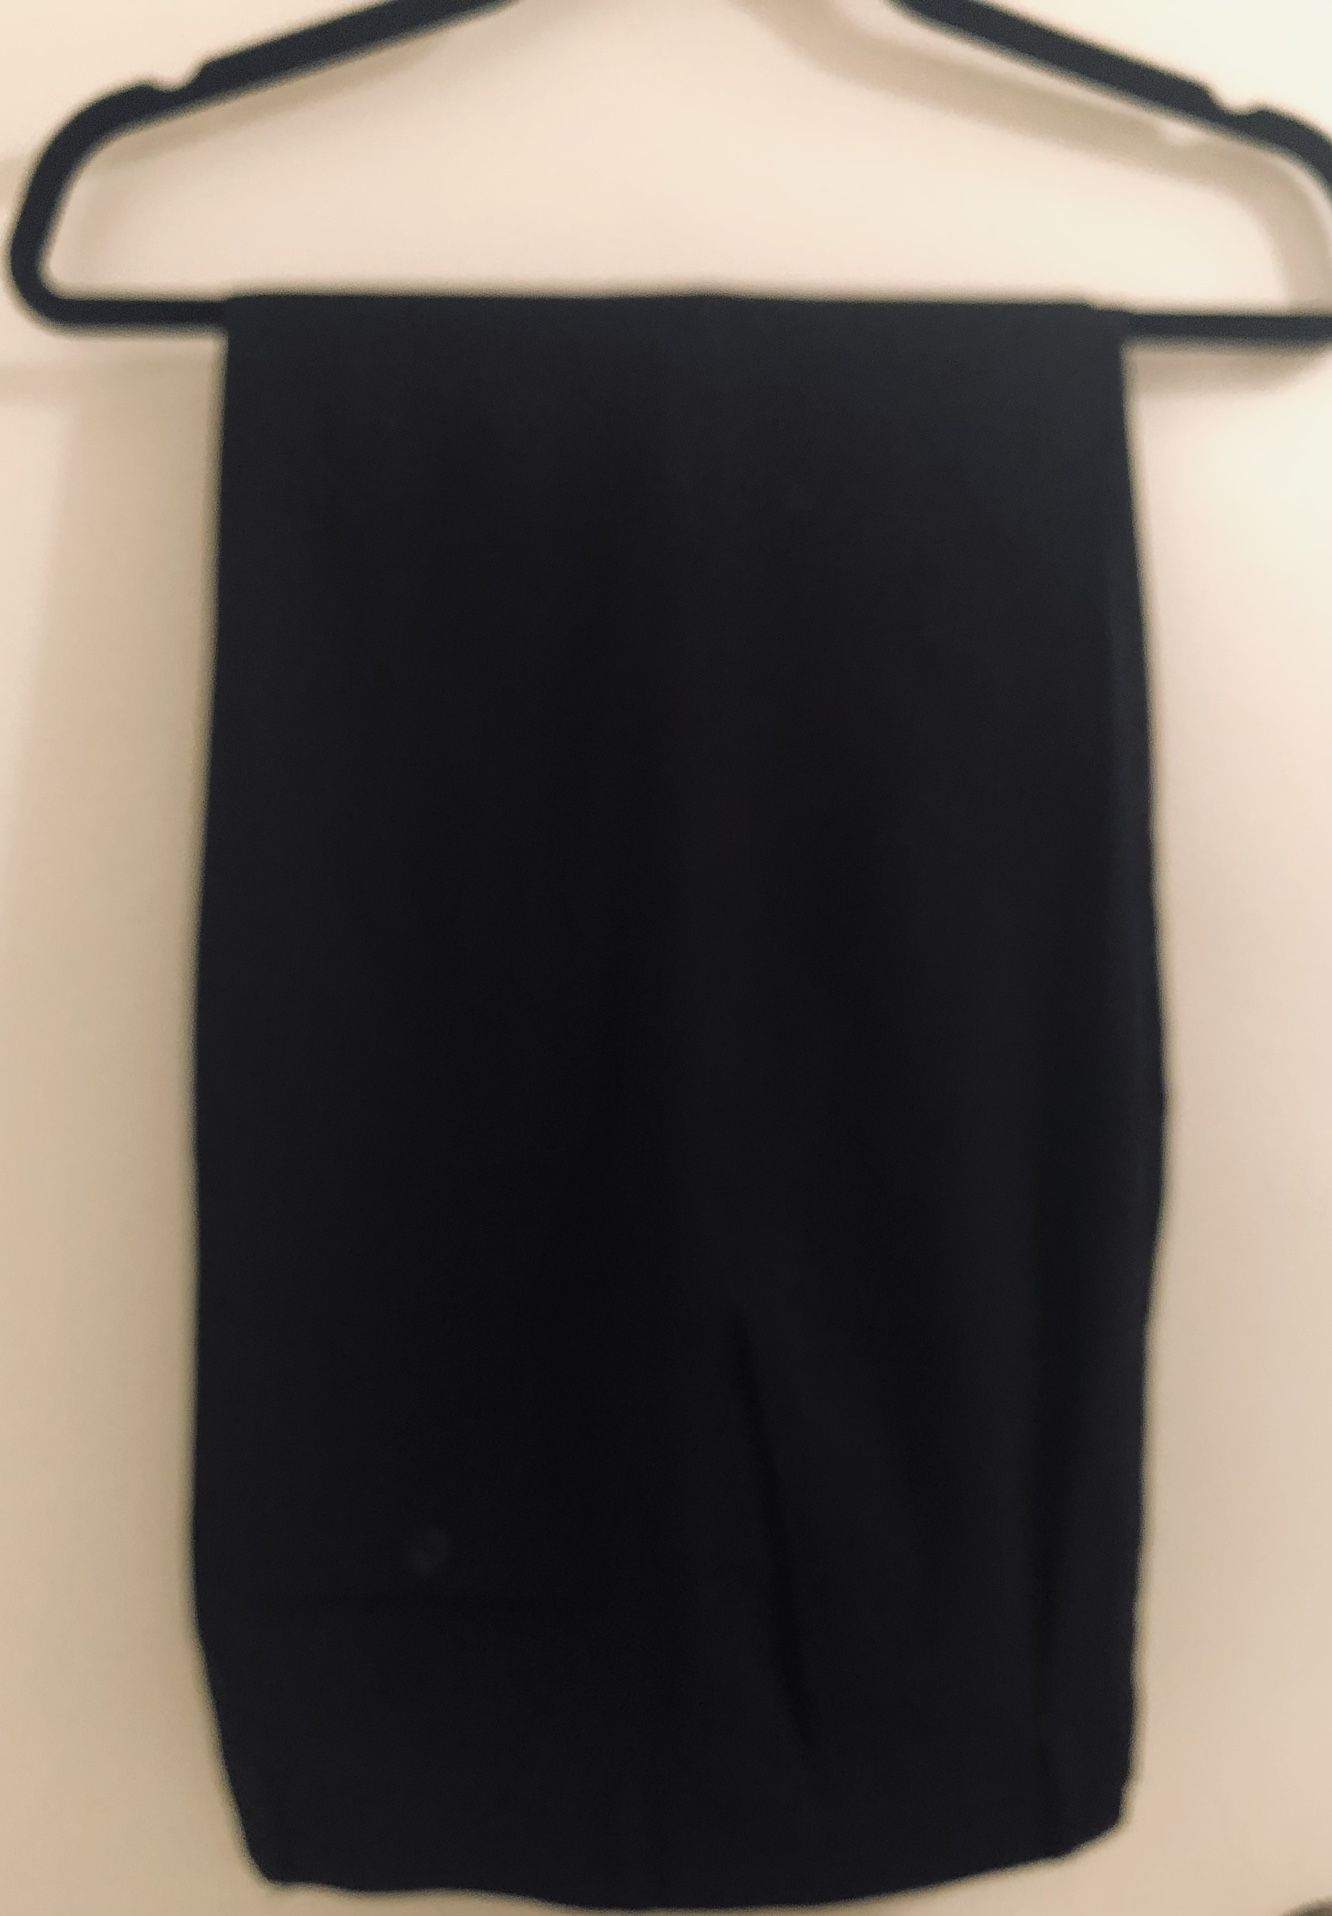 Armani Collezioni Black Dress Pants/Slacks GC-They’re Marked 38x32 But I believe they were taken in on waist-Measured and came up with 30-32 x 32 